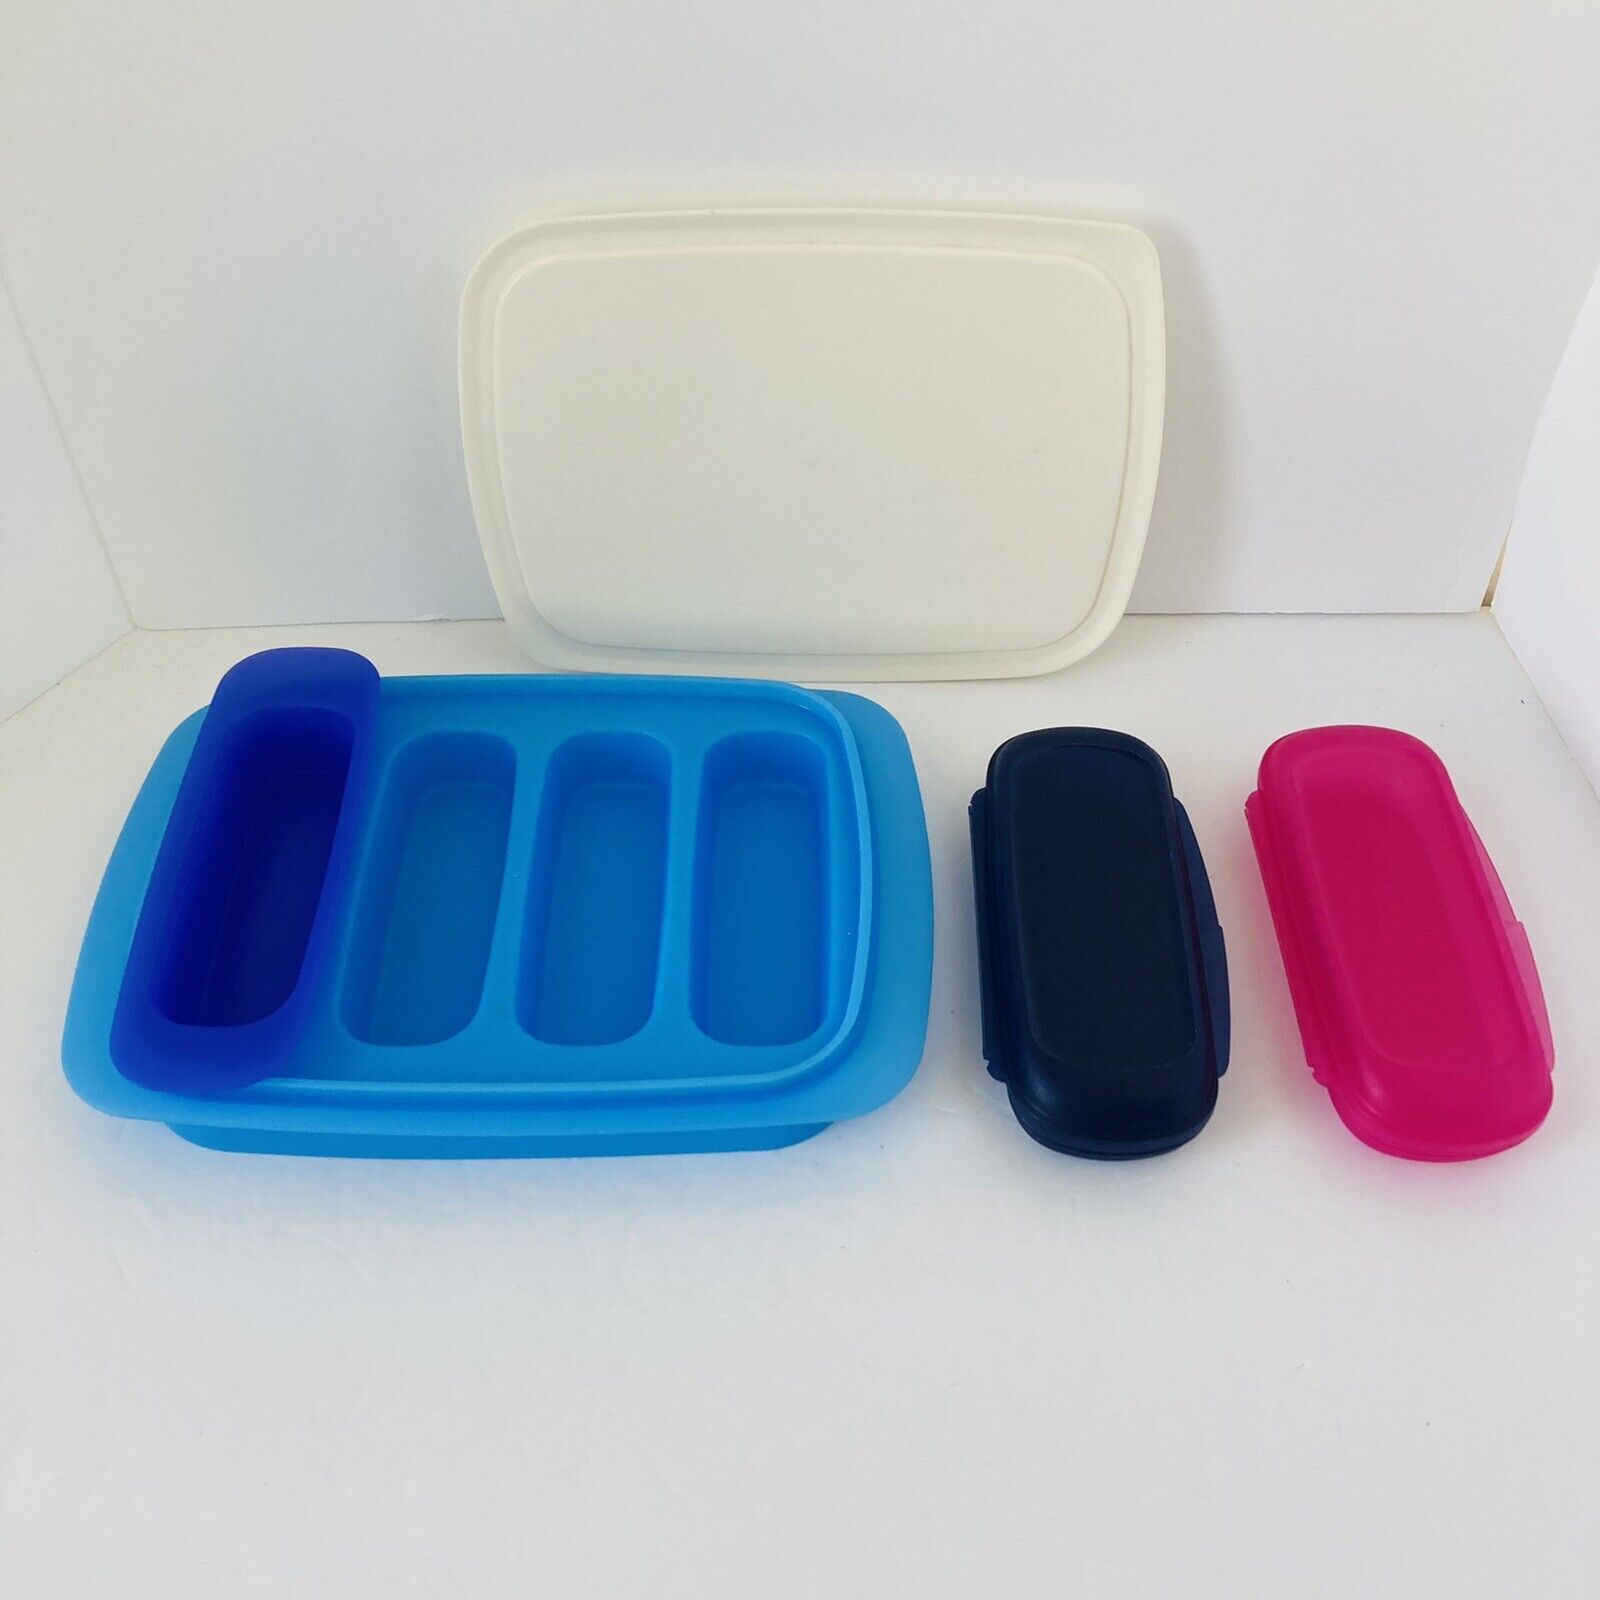 NEW Tupperware Granola Snack Bar Maker & 2 Keepers Blue And White